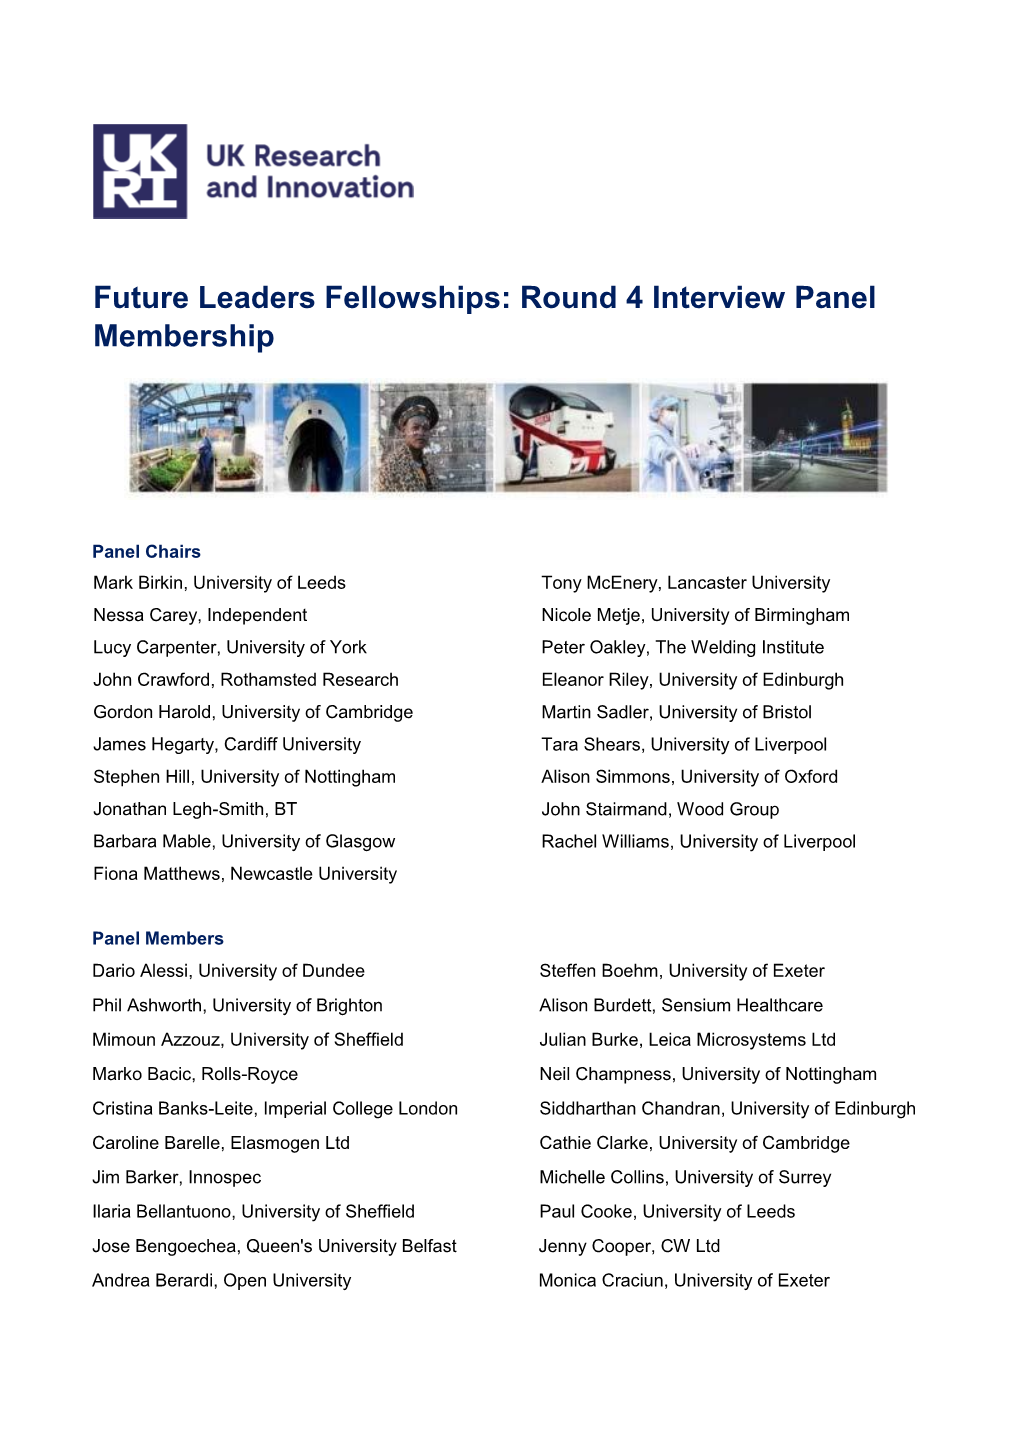 Future Leaders Fellowships: Round 4 Interview Panel Membership